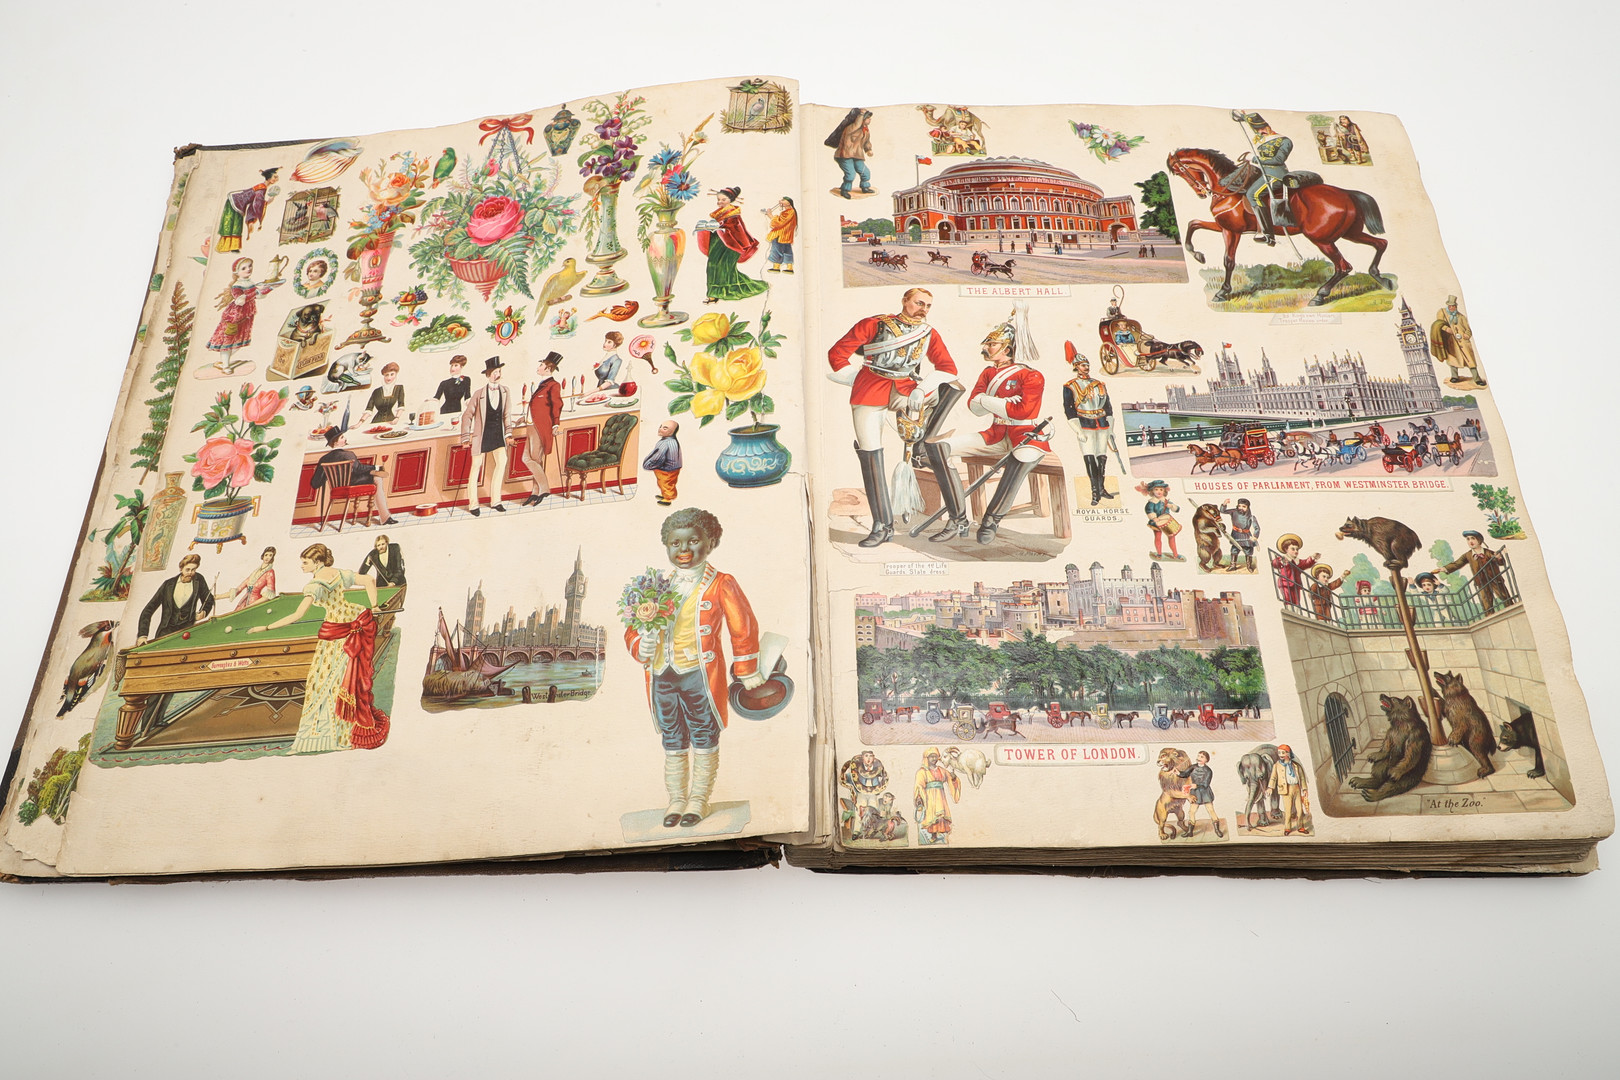 LARGE EARLY 20THC SCRAP BOOK - INCLUDING THE NORTH POLE. - Image 21 of 25